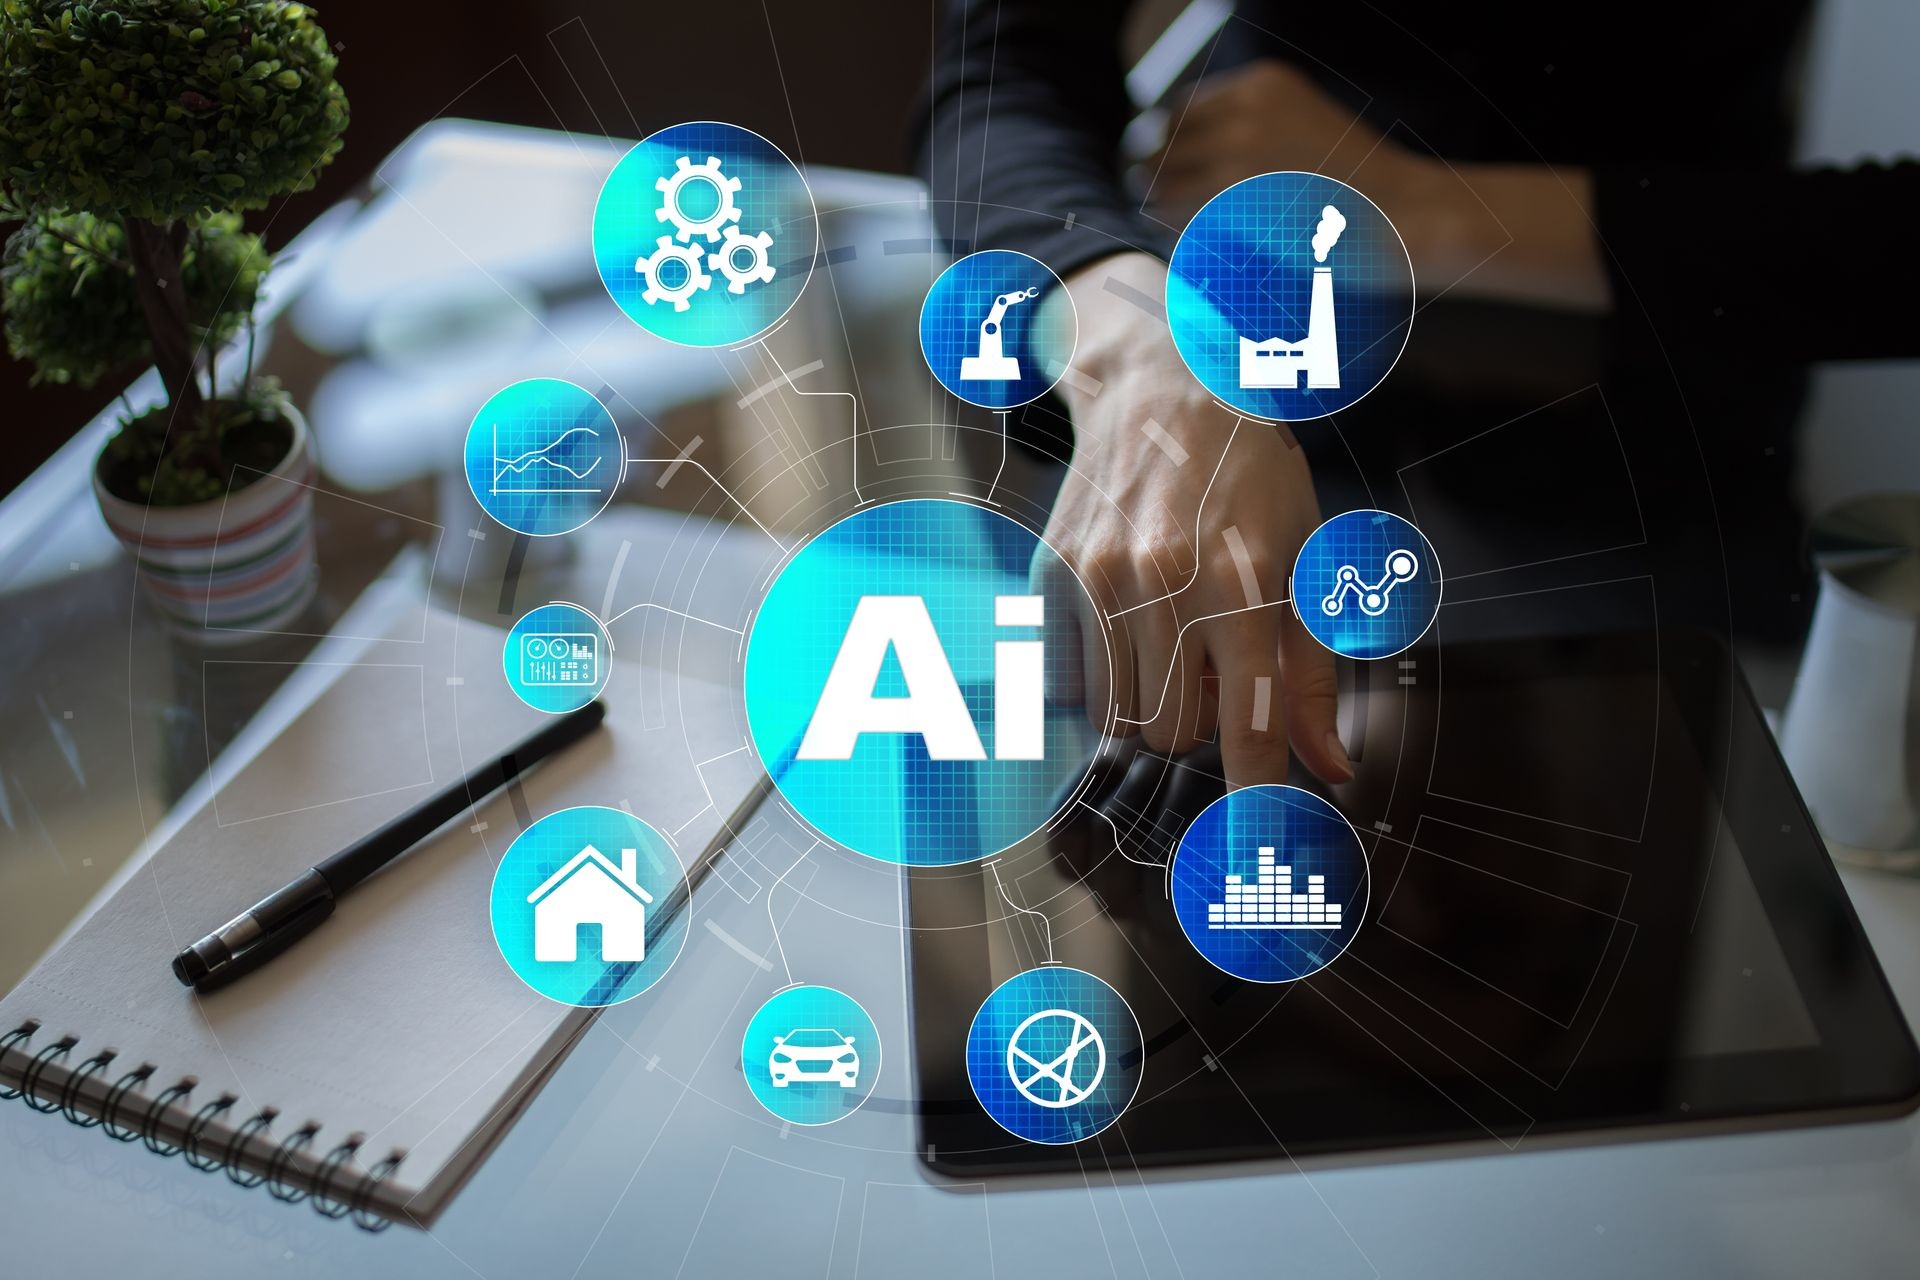 AI, Artificial intelligence, machine learning, neural networks and modern technologies concepts. IOT and automation.